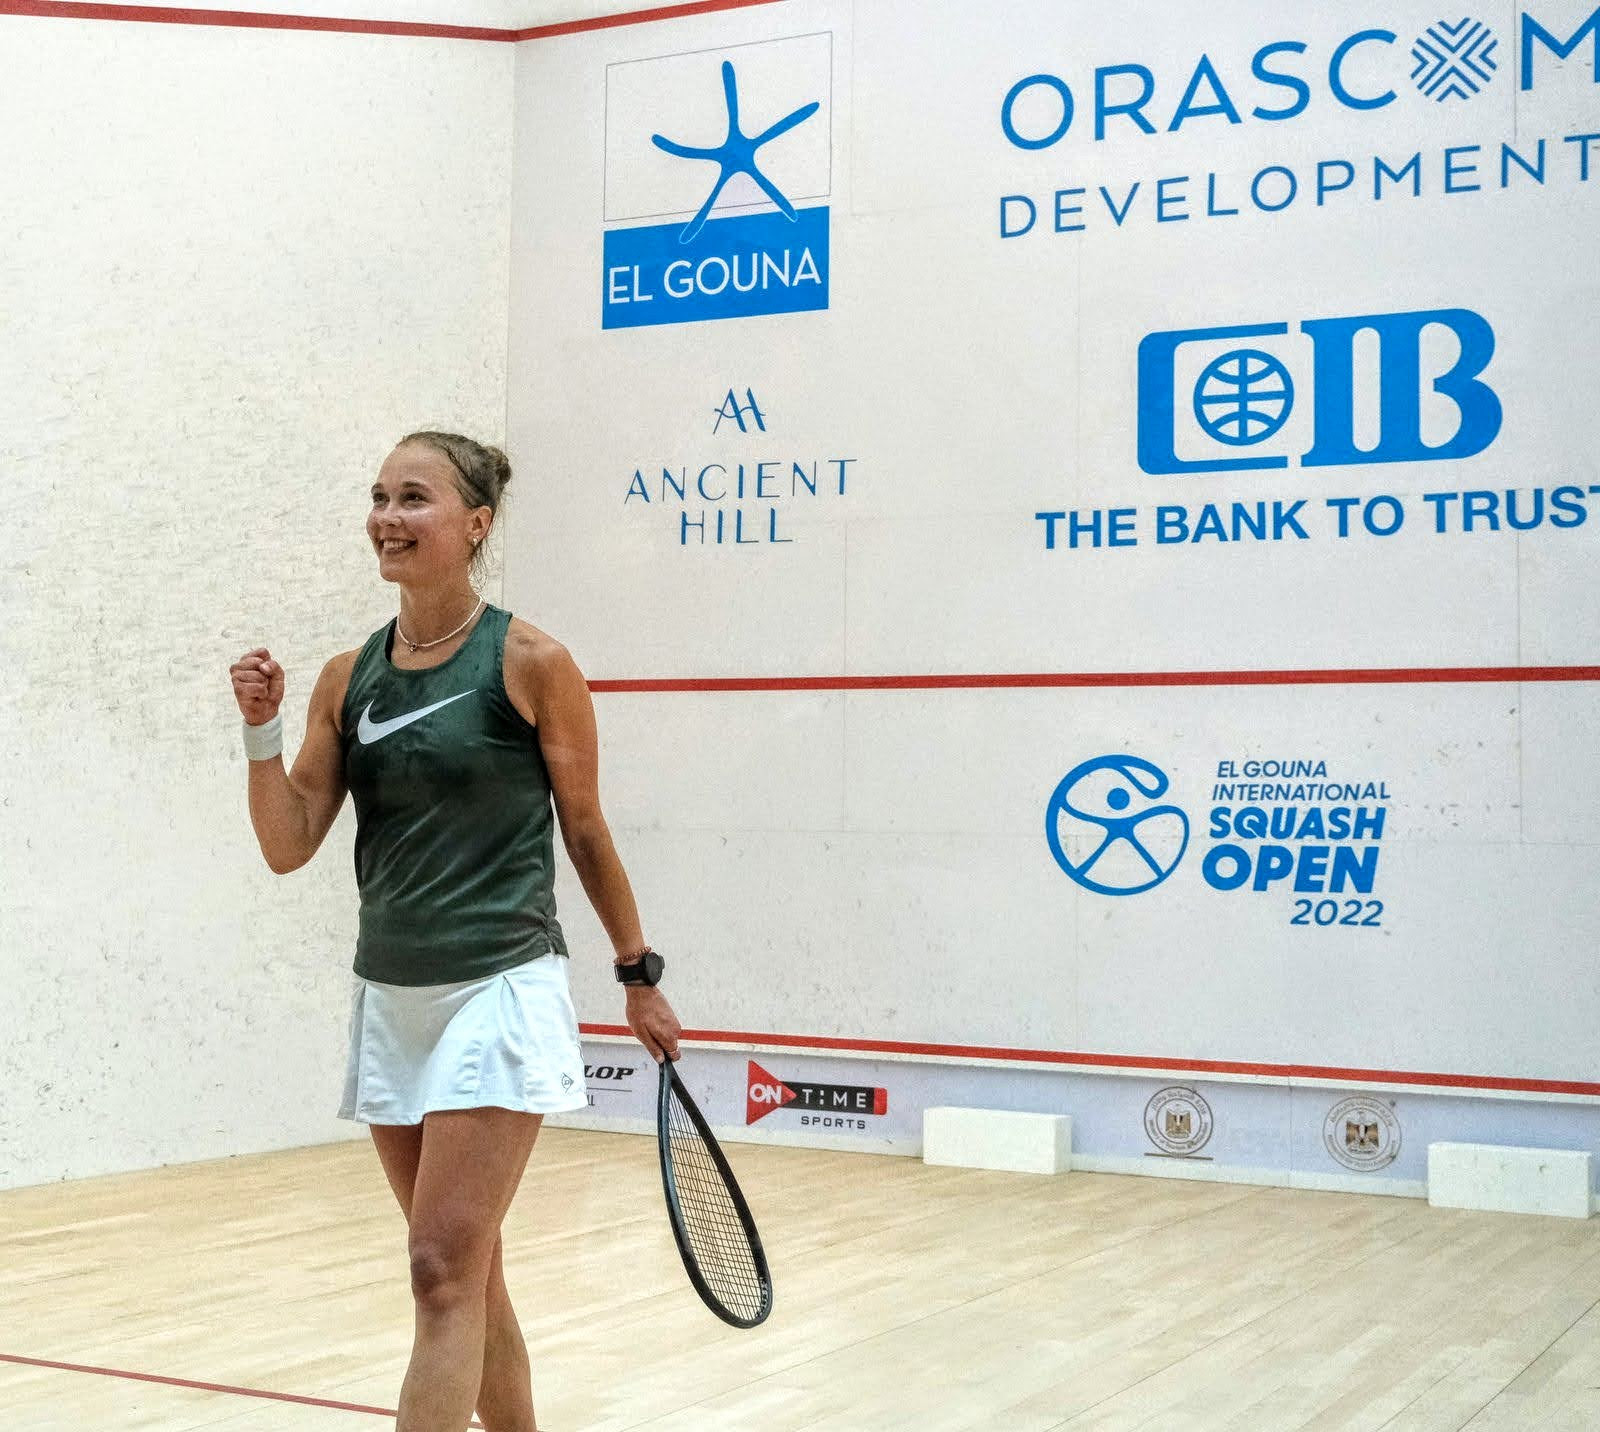 Women’s fourth seed Sobhy biggest casualty in second round of El Gouna Squash International